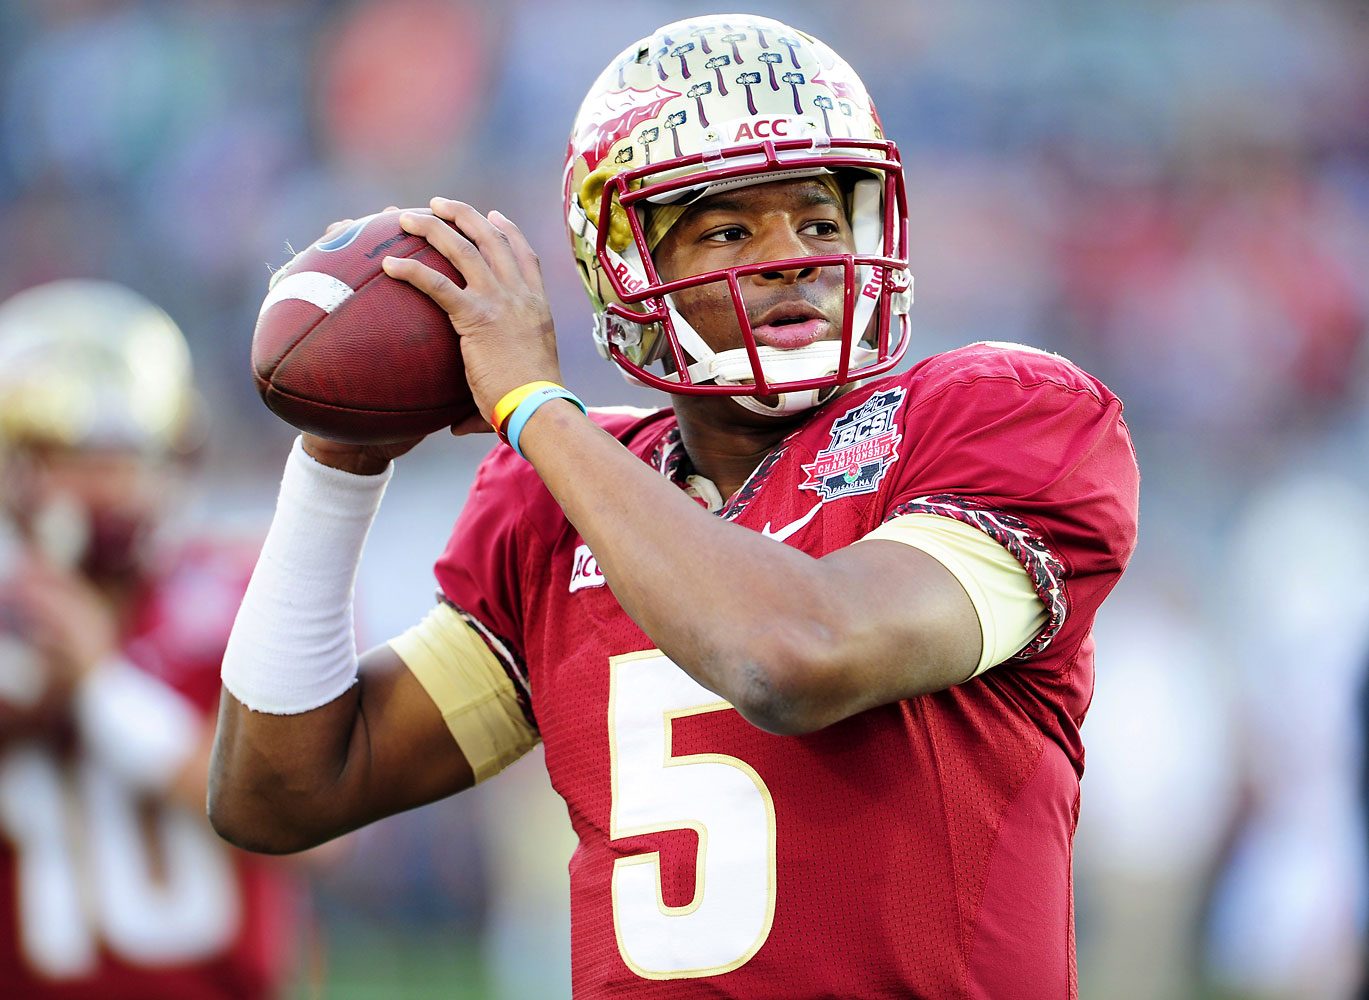 Jameis Winston of the Florida State Seminoles in action during the BCS National Championship. Florida State defeated Auburn 34-31 in the game at the Rose Bowl in Pasadena, Calif., Jan. 6 2014.